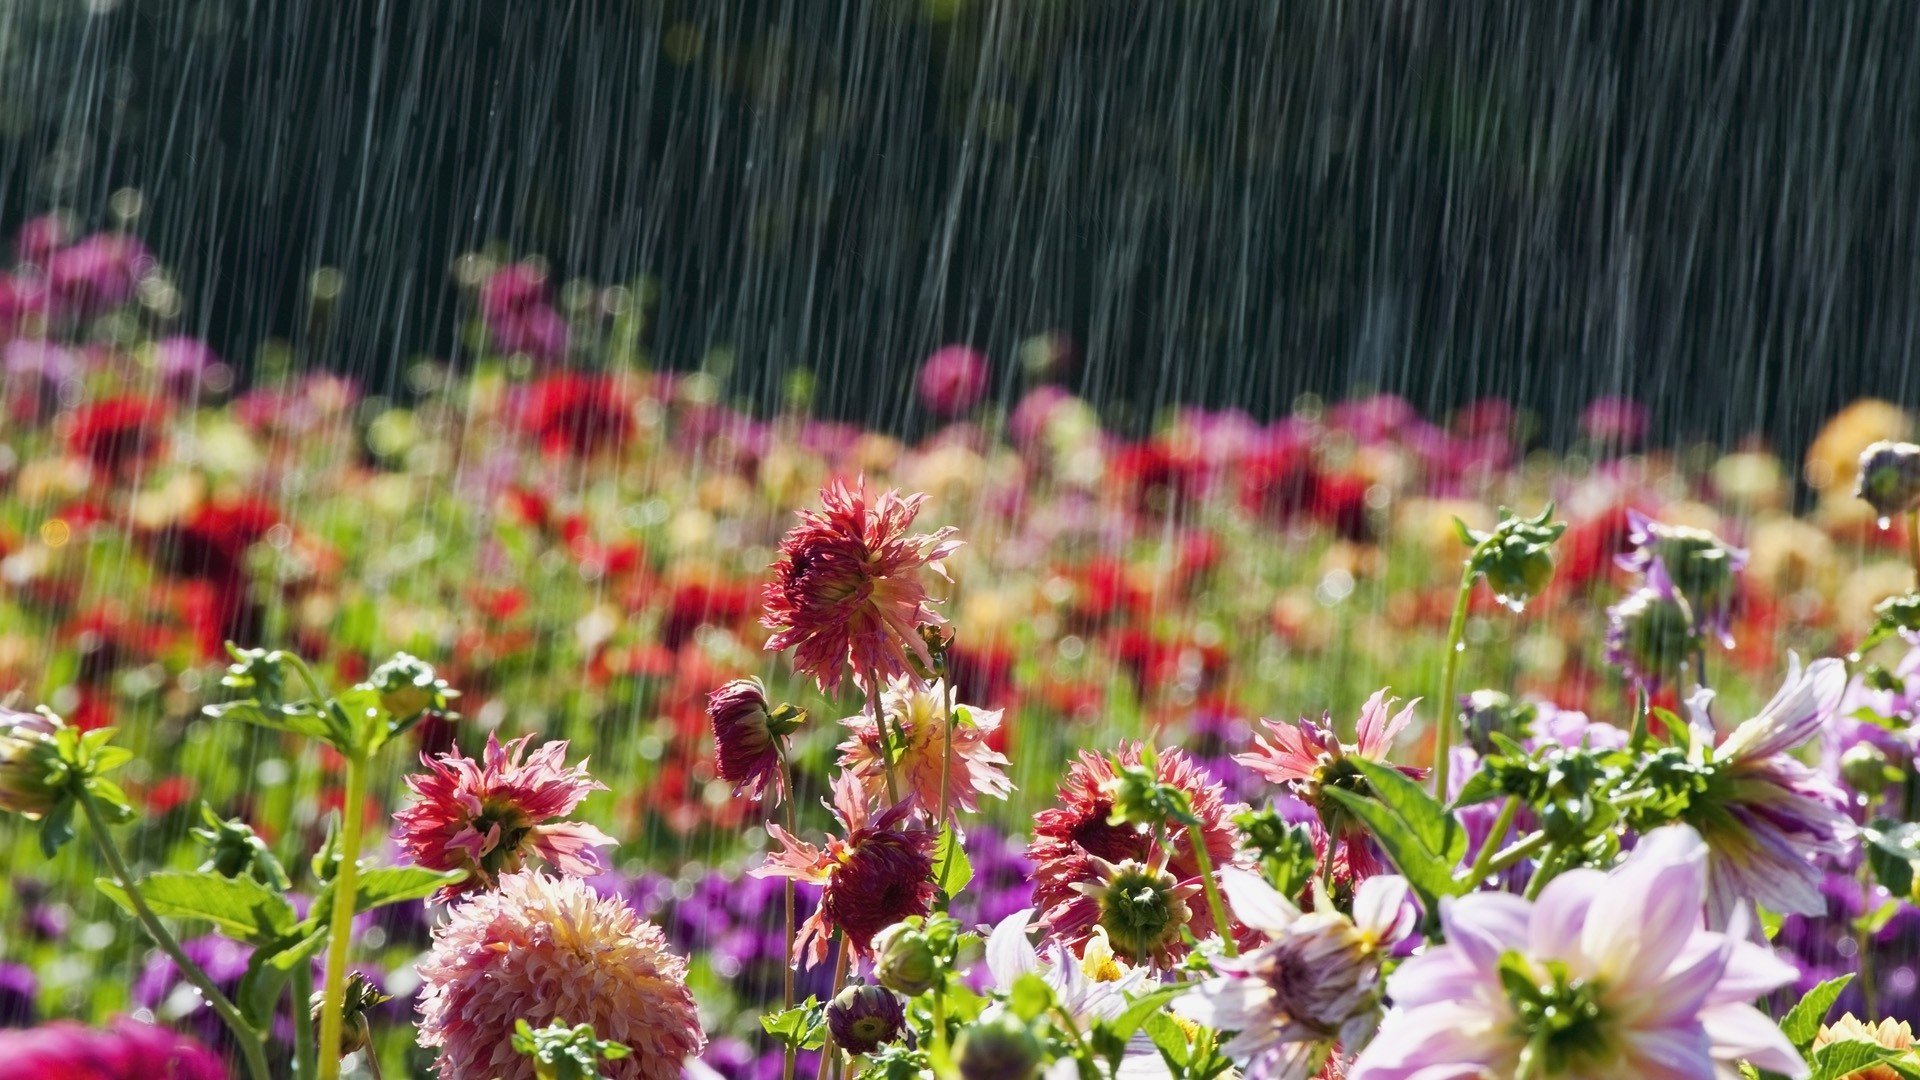 Rain on Flowers Wallpapers HD Wallpapers Pictures Images